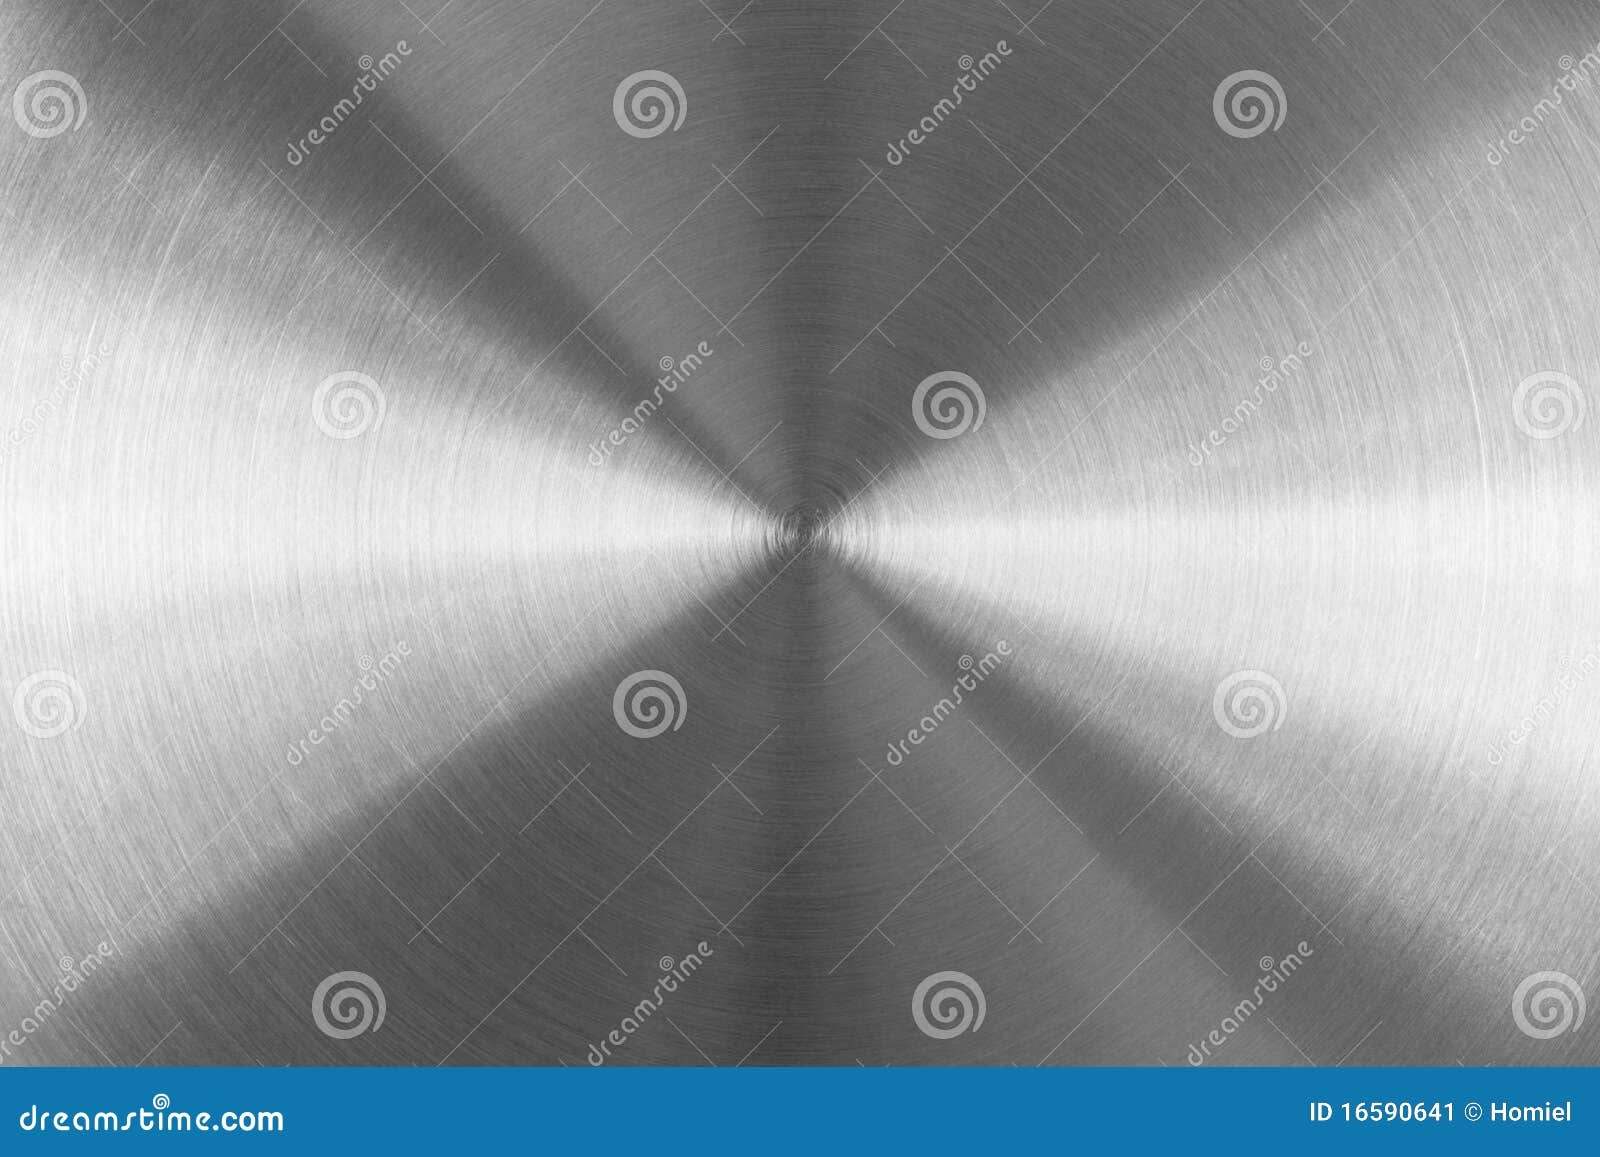 Stainless steel background stock image. Image of plate - 16590641